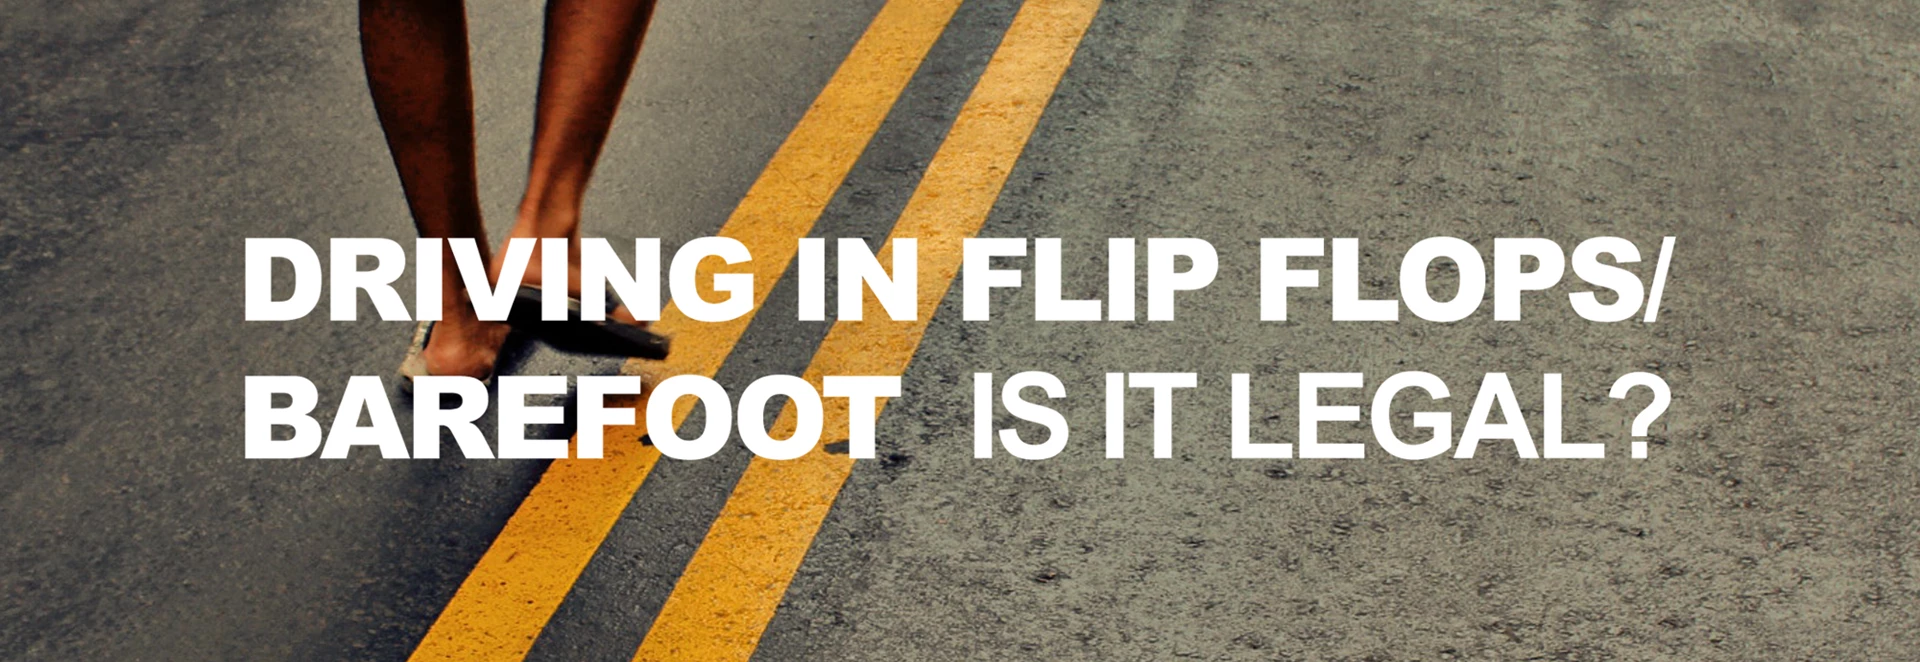 Driving in Flip Flops or Barefoot: Is it legal in the UK?